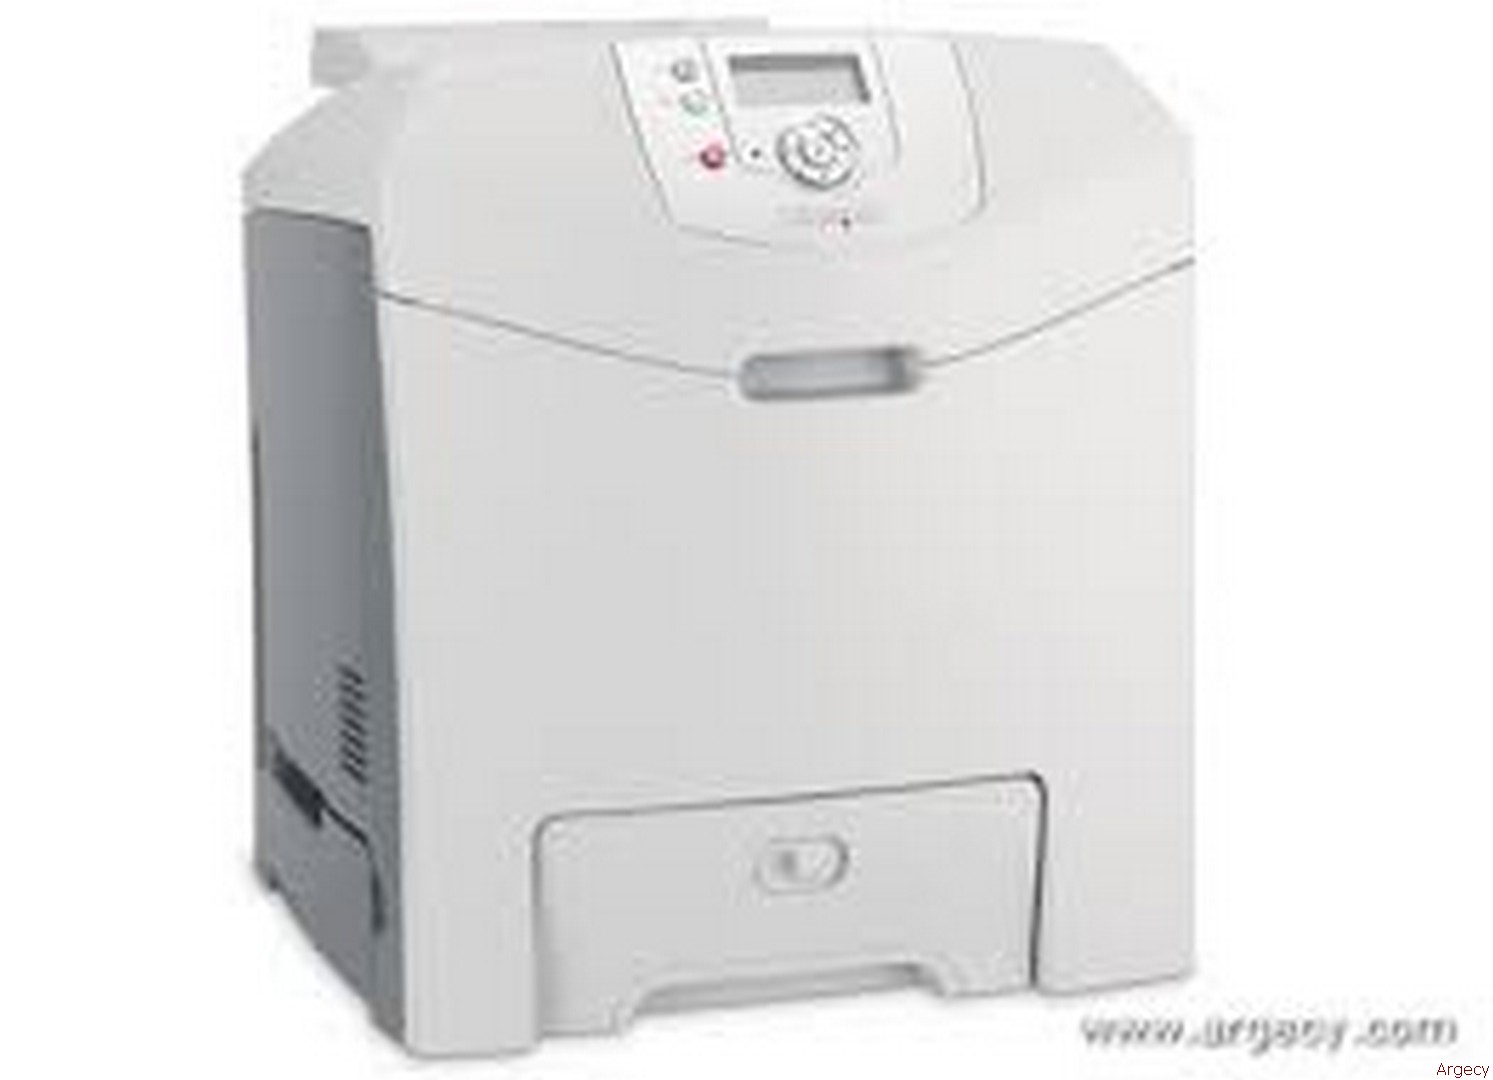 Lexmark C524N 22B0050 5022-410 - purchase from Argecy